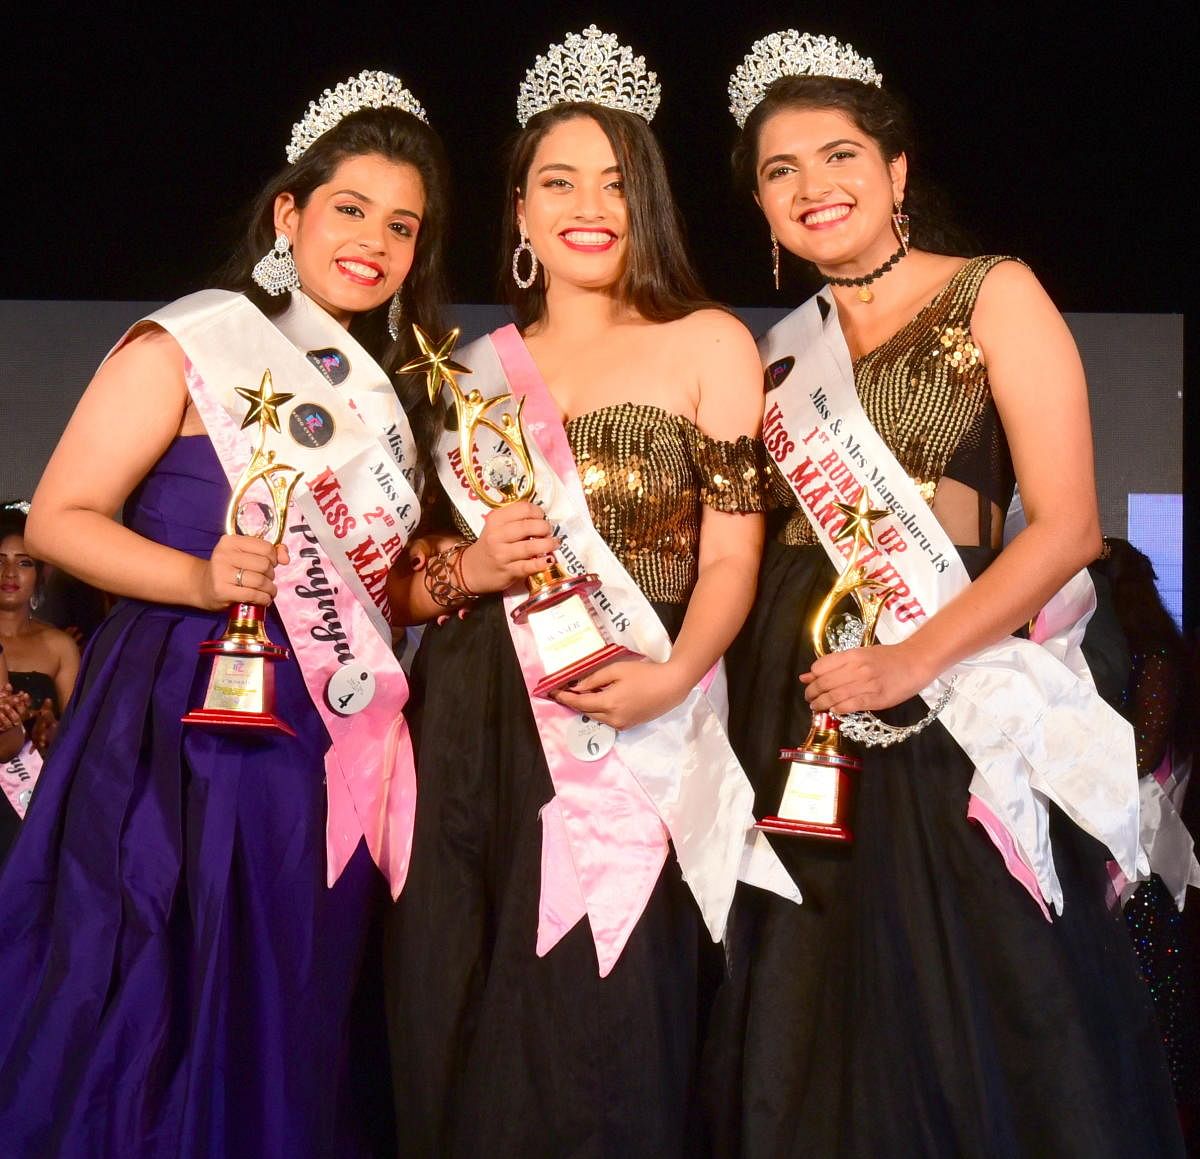 Beauty pageant winners take part in charity activities